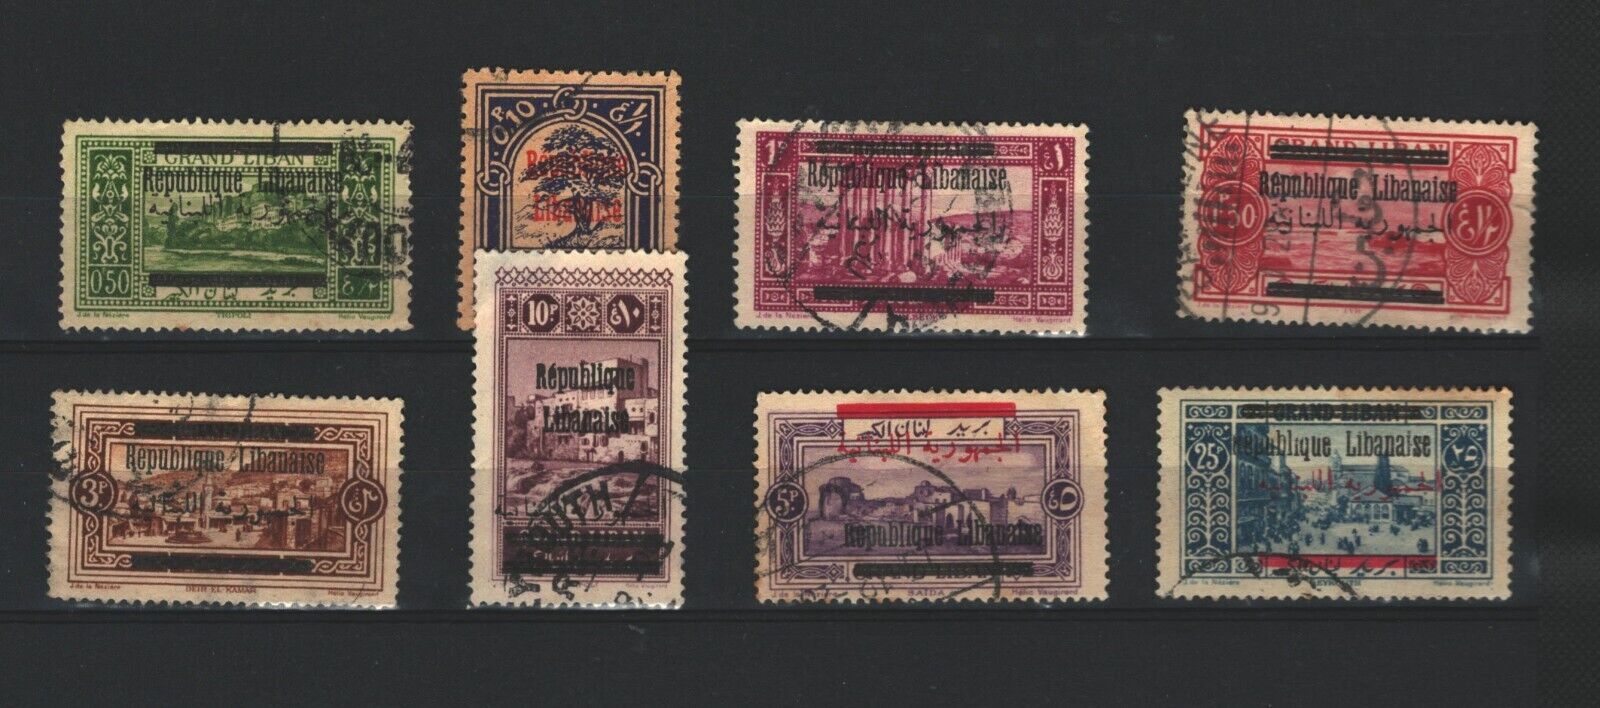 Liban  French colonies Postal USED Set of  Overprinted STAMPS LOT ( Leb 58) Без бренда